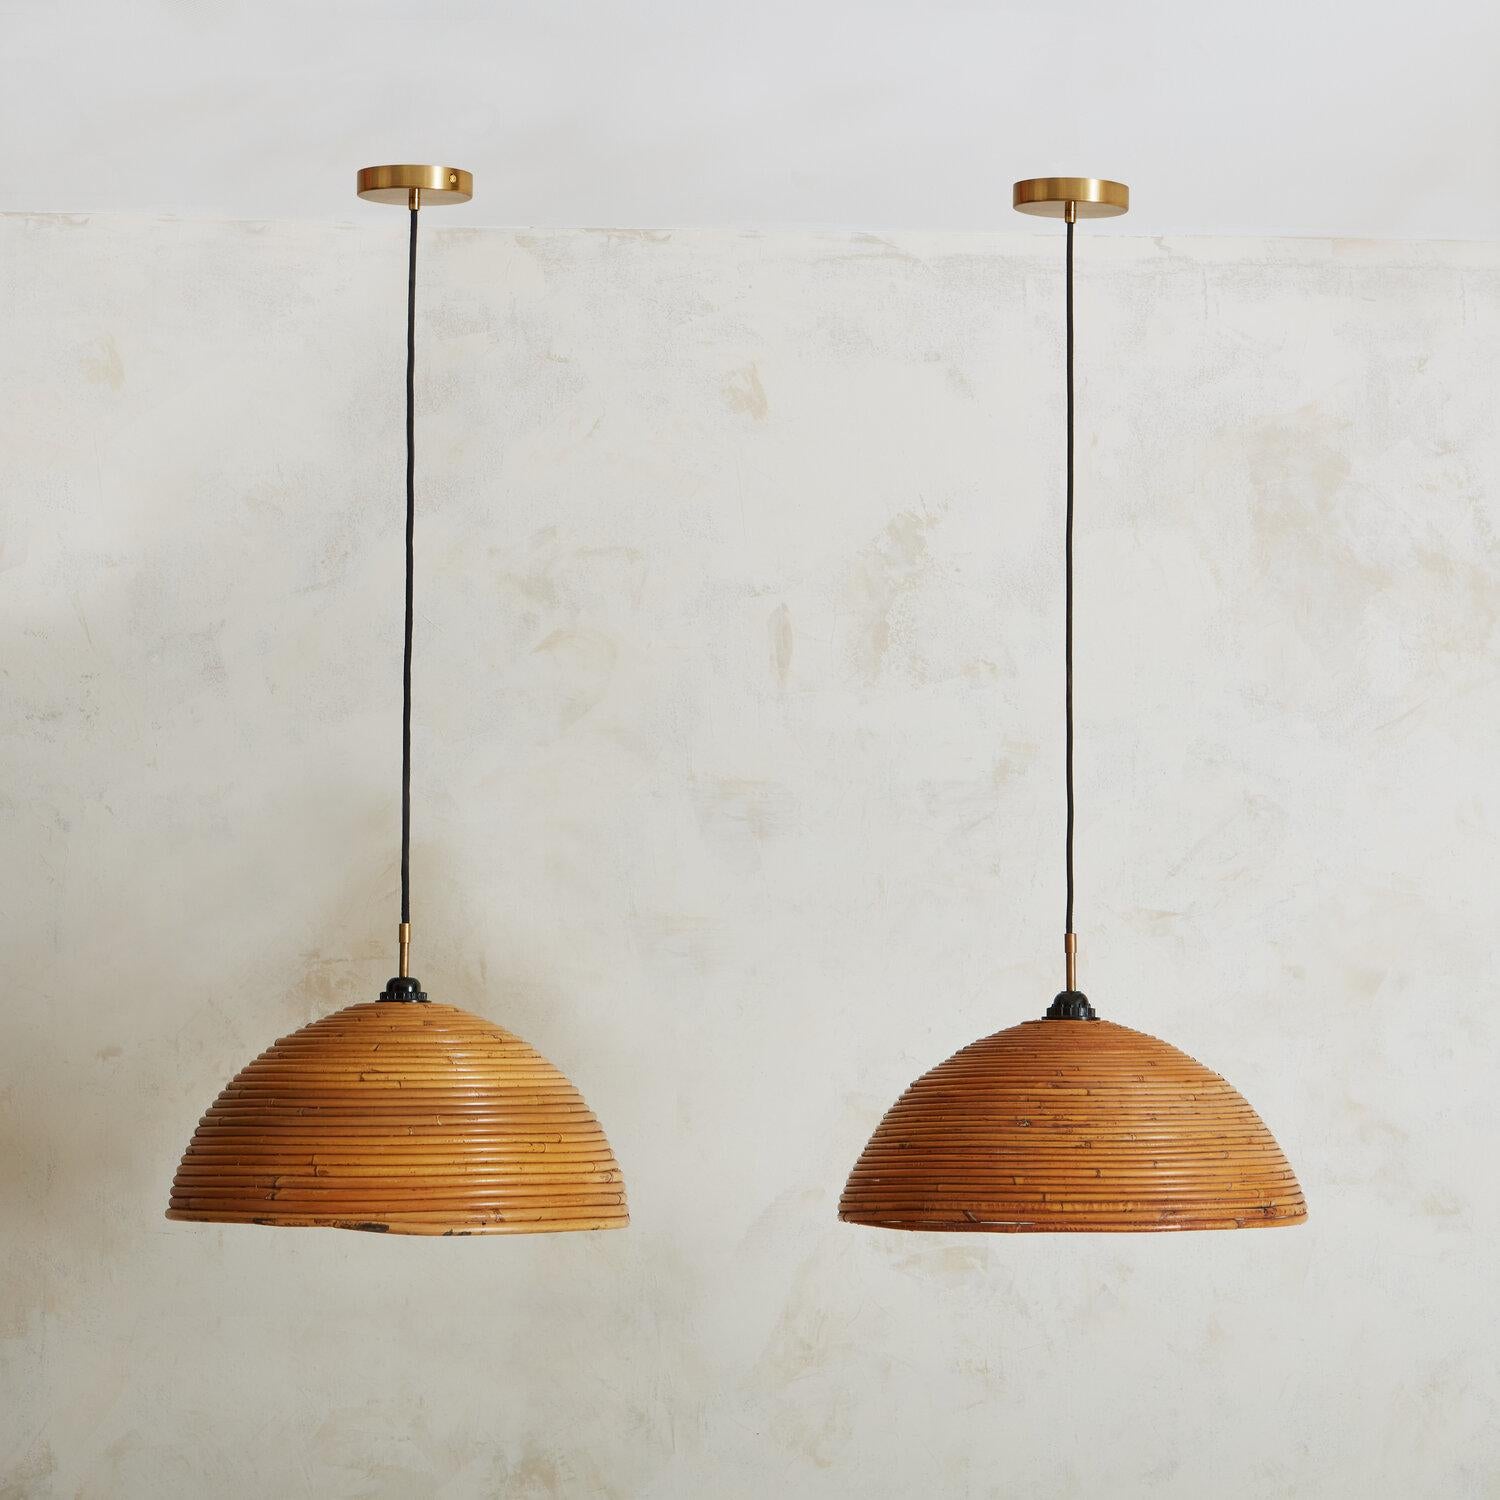 A pair of mid-century bamboo pendant lights, reminiscent of designs by Gabrielle Crespi. These pendants feature a black woven cord and new brass canopies, mixing both organic and contemporary elements. Sourced in Spain. 

Dimensions: 10.5” height;